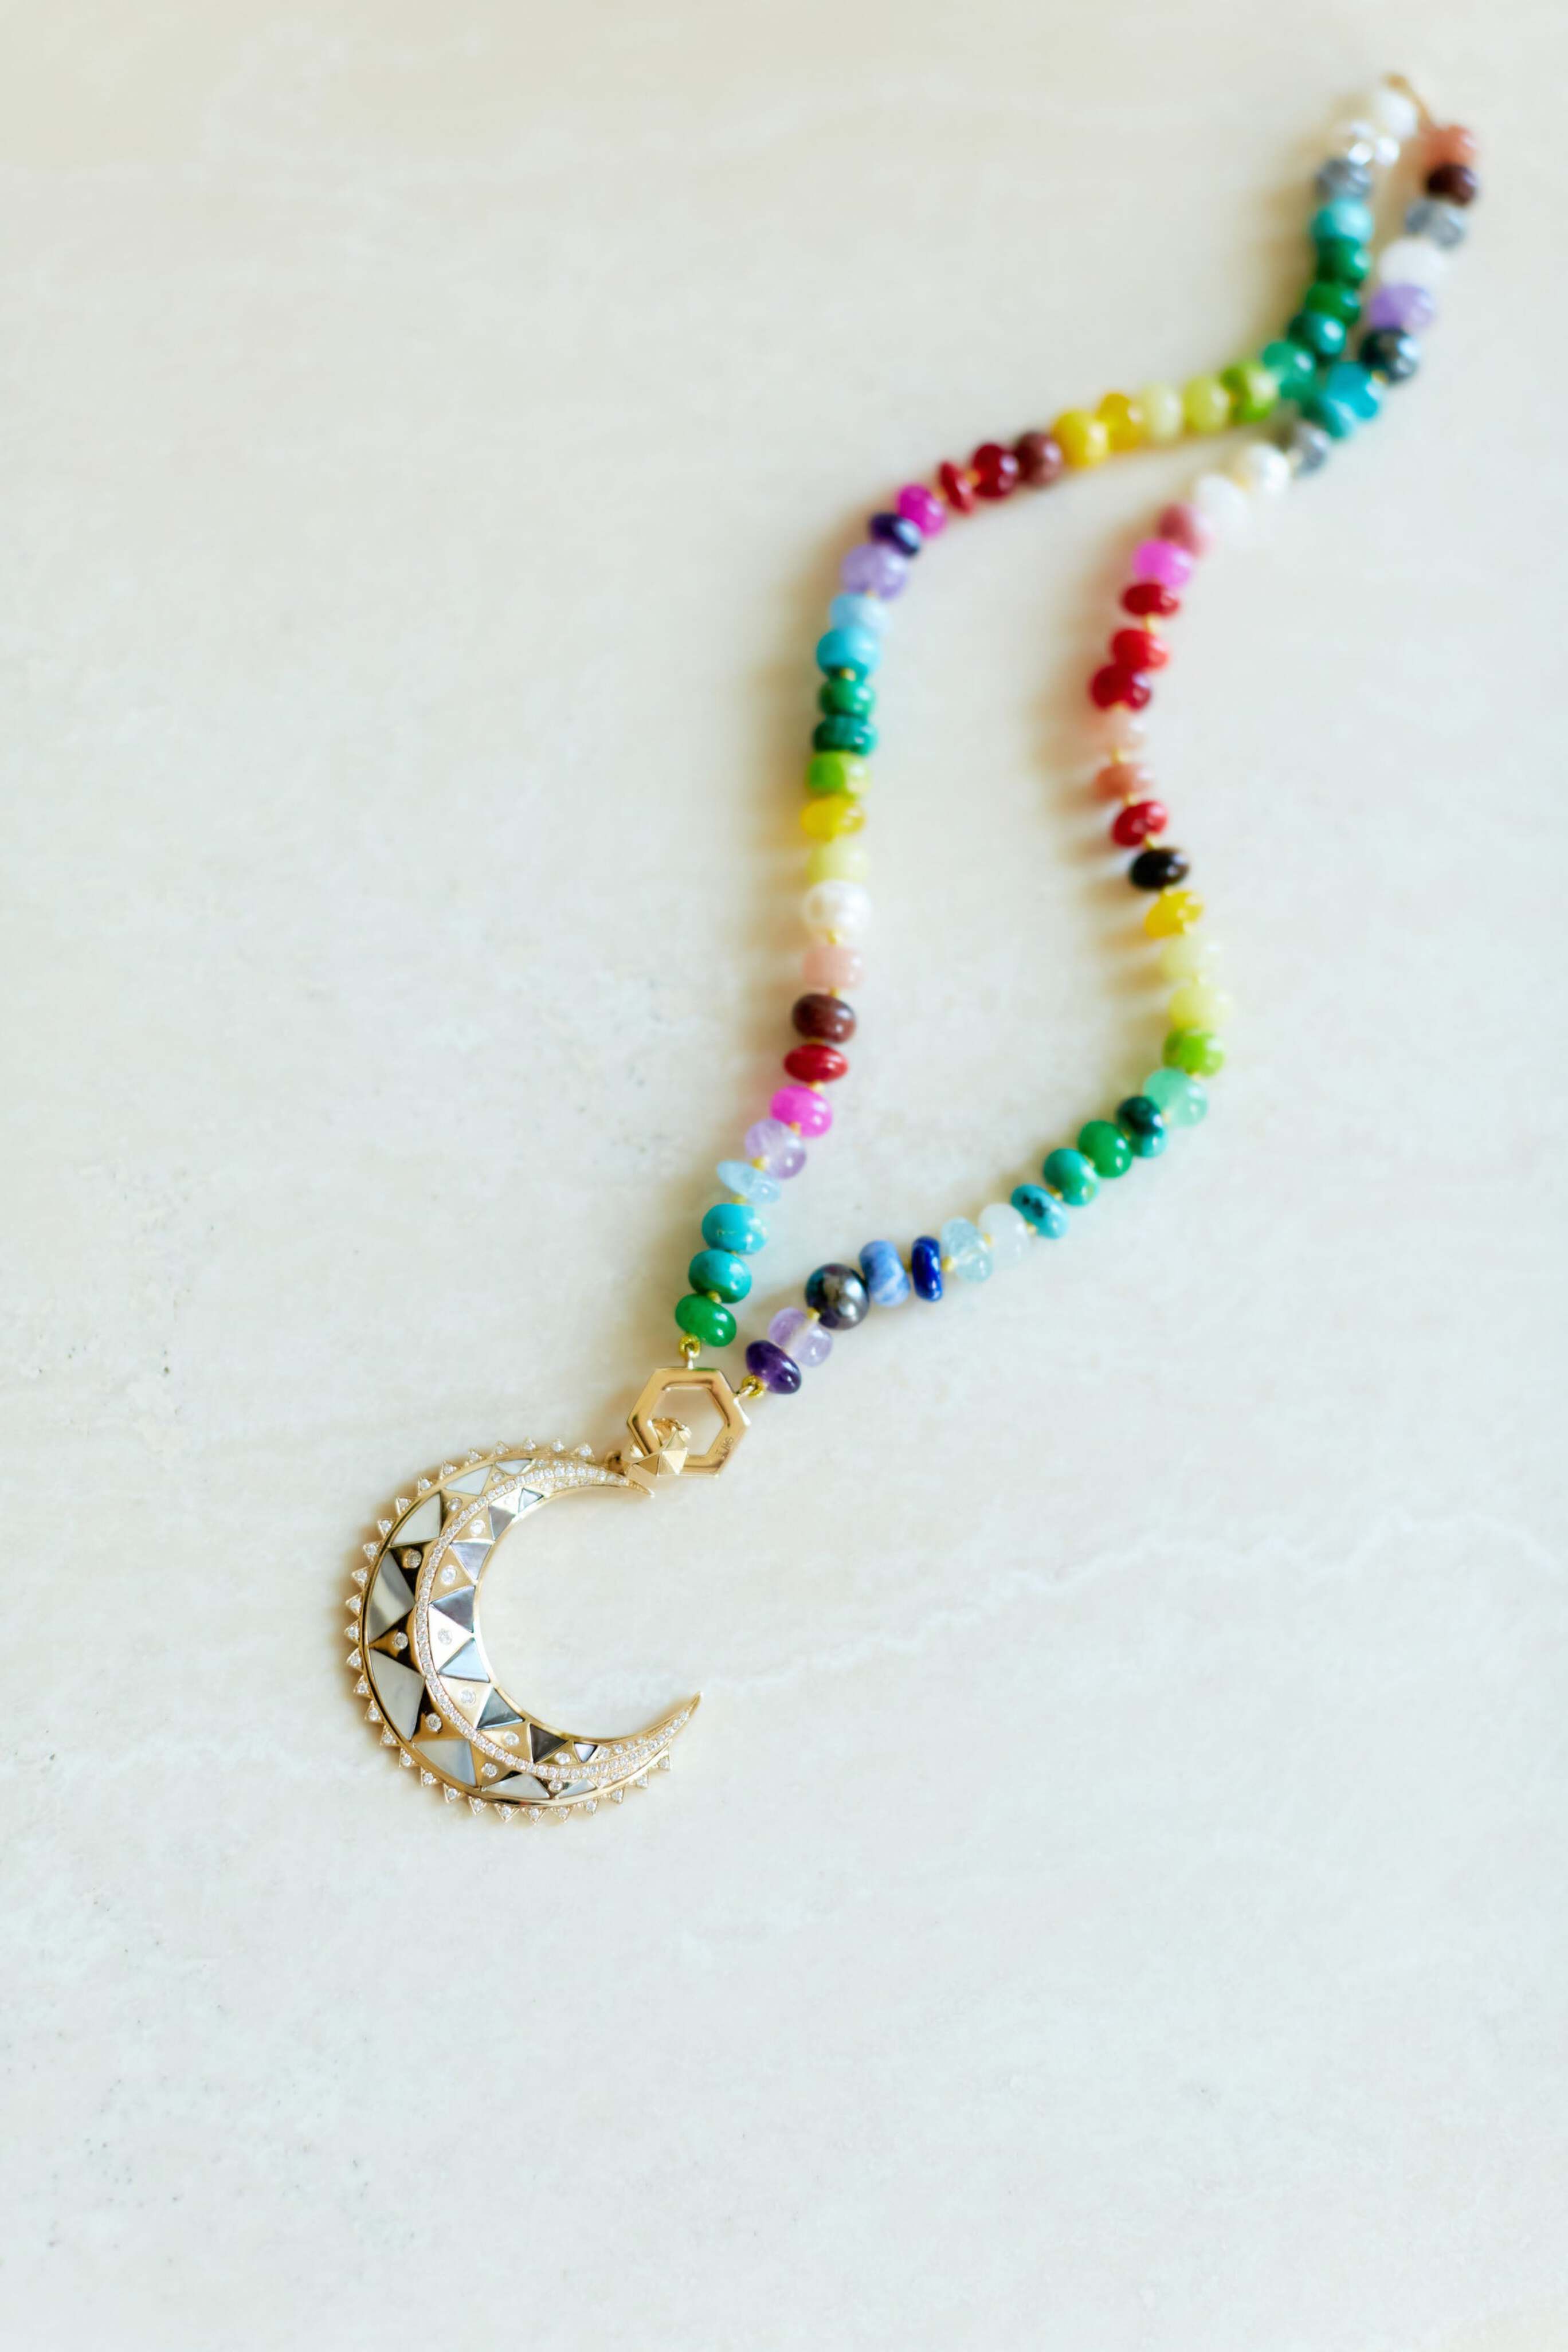 Rainbow Hombre Sapphire, Ruby and Emerald Beaded necklace - Yumé Jewellery  - Ethical, Fairtrade Jewellery UK